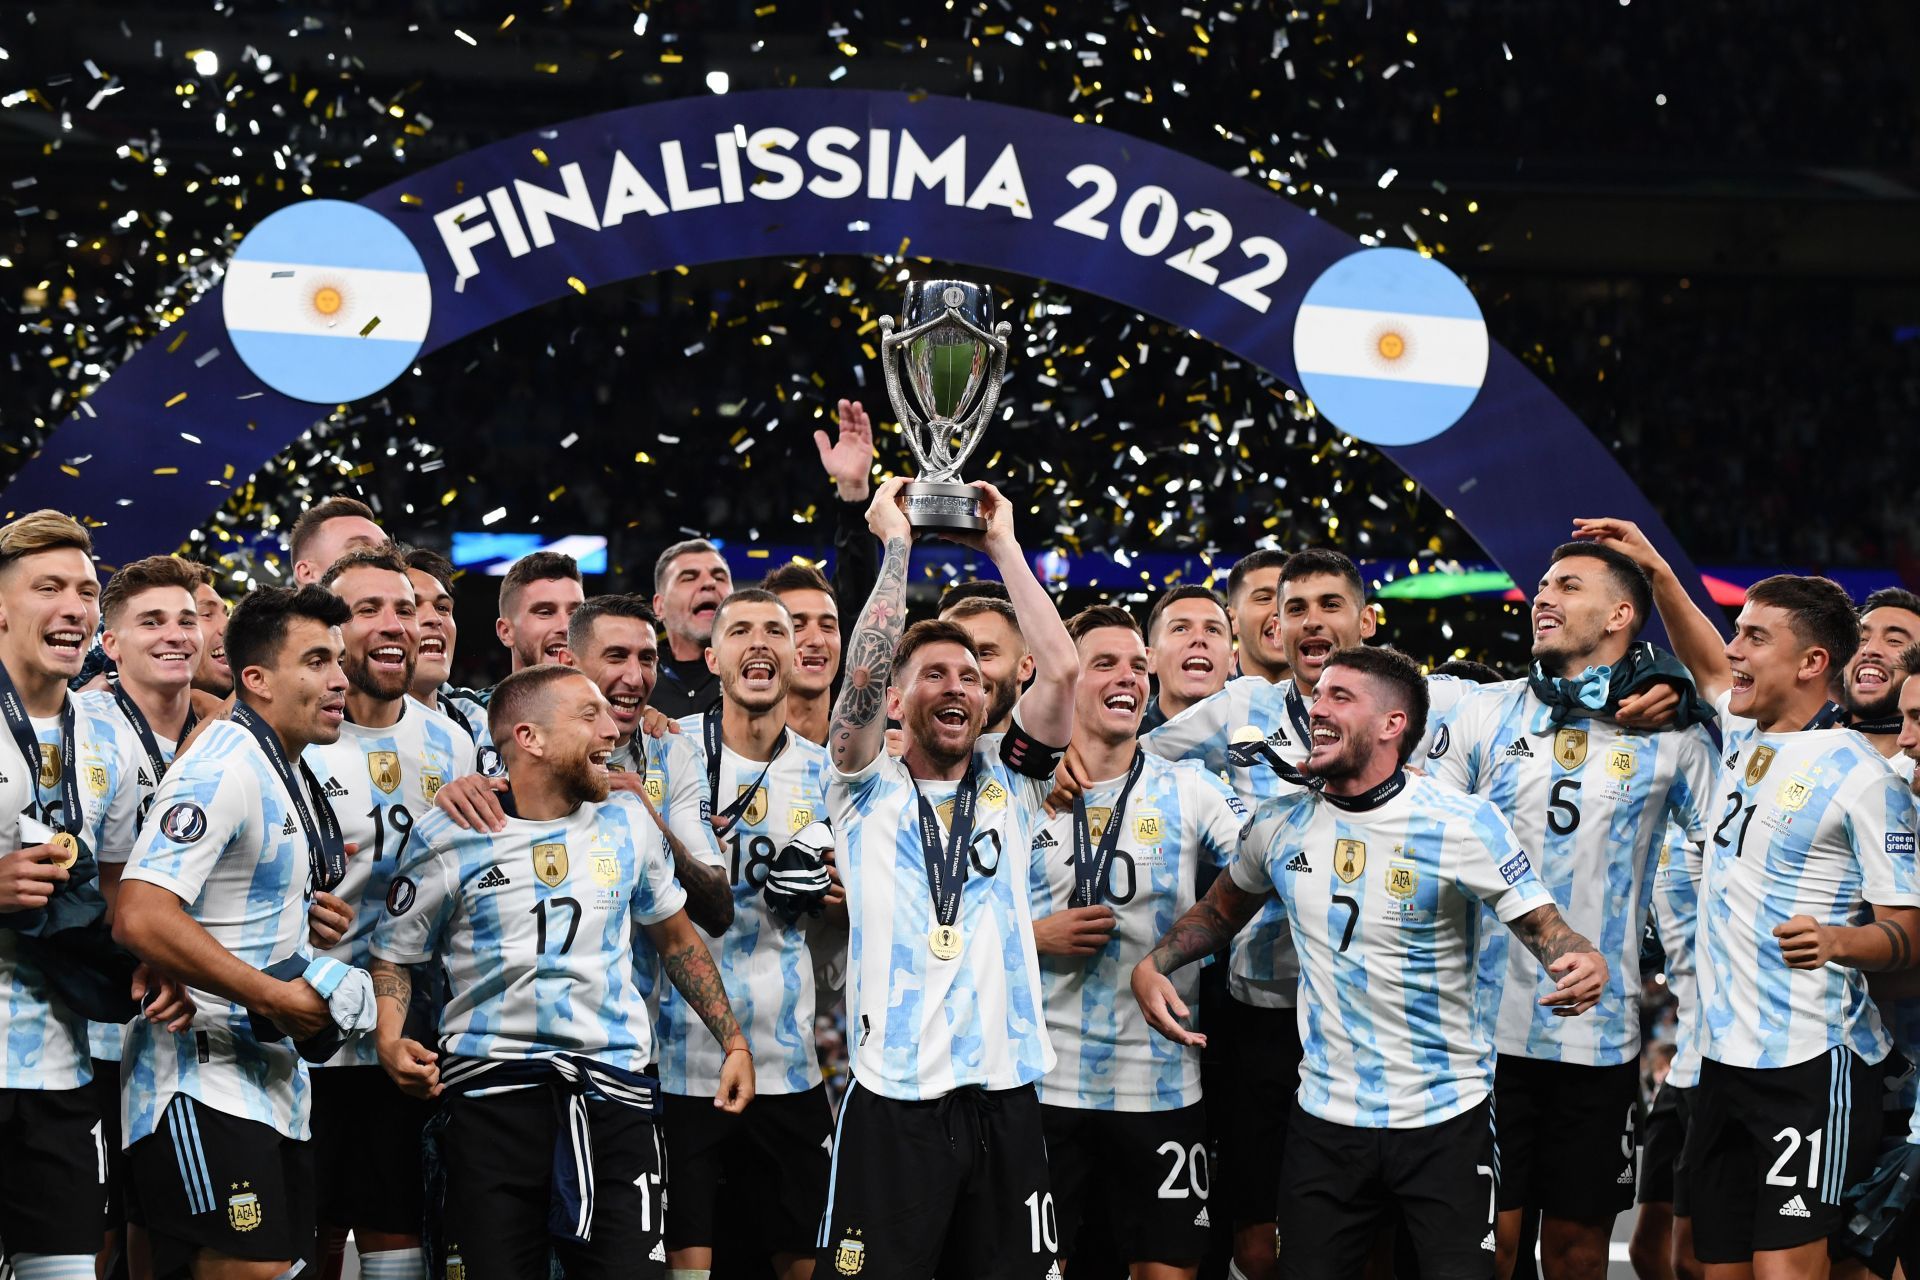 Can Argentina win it all?